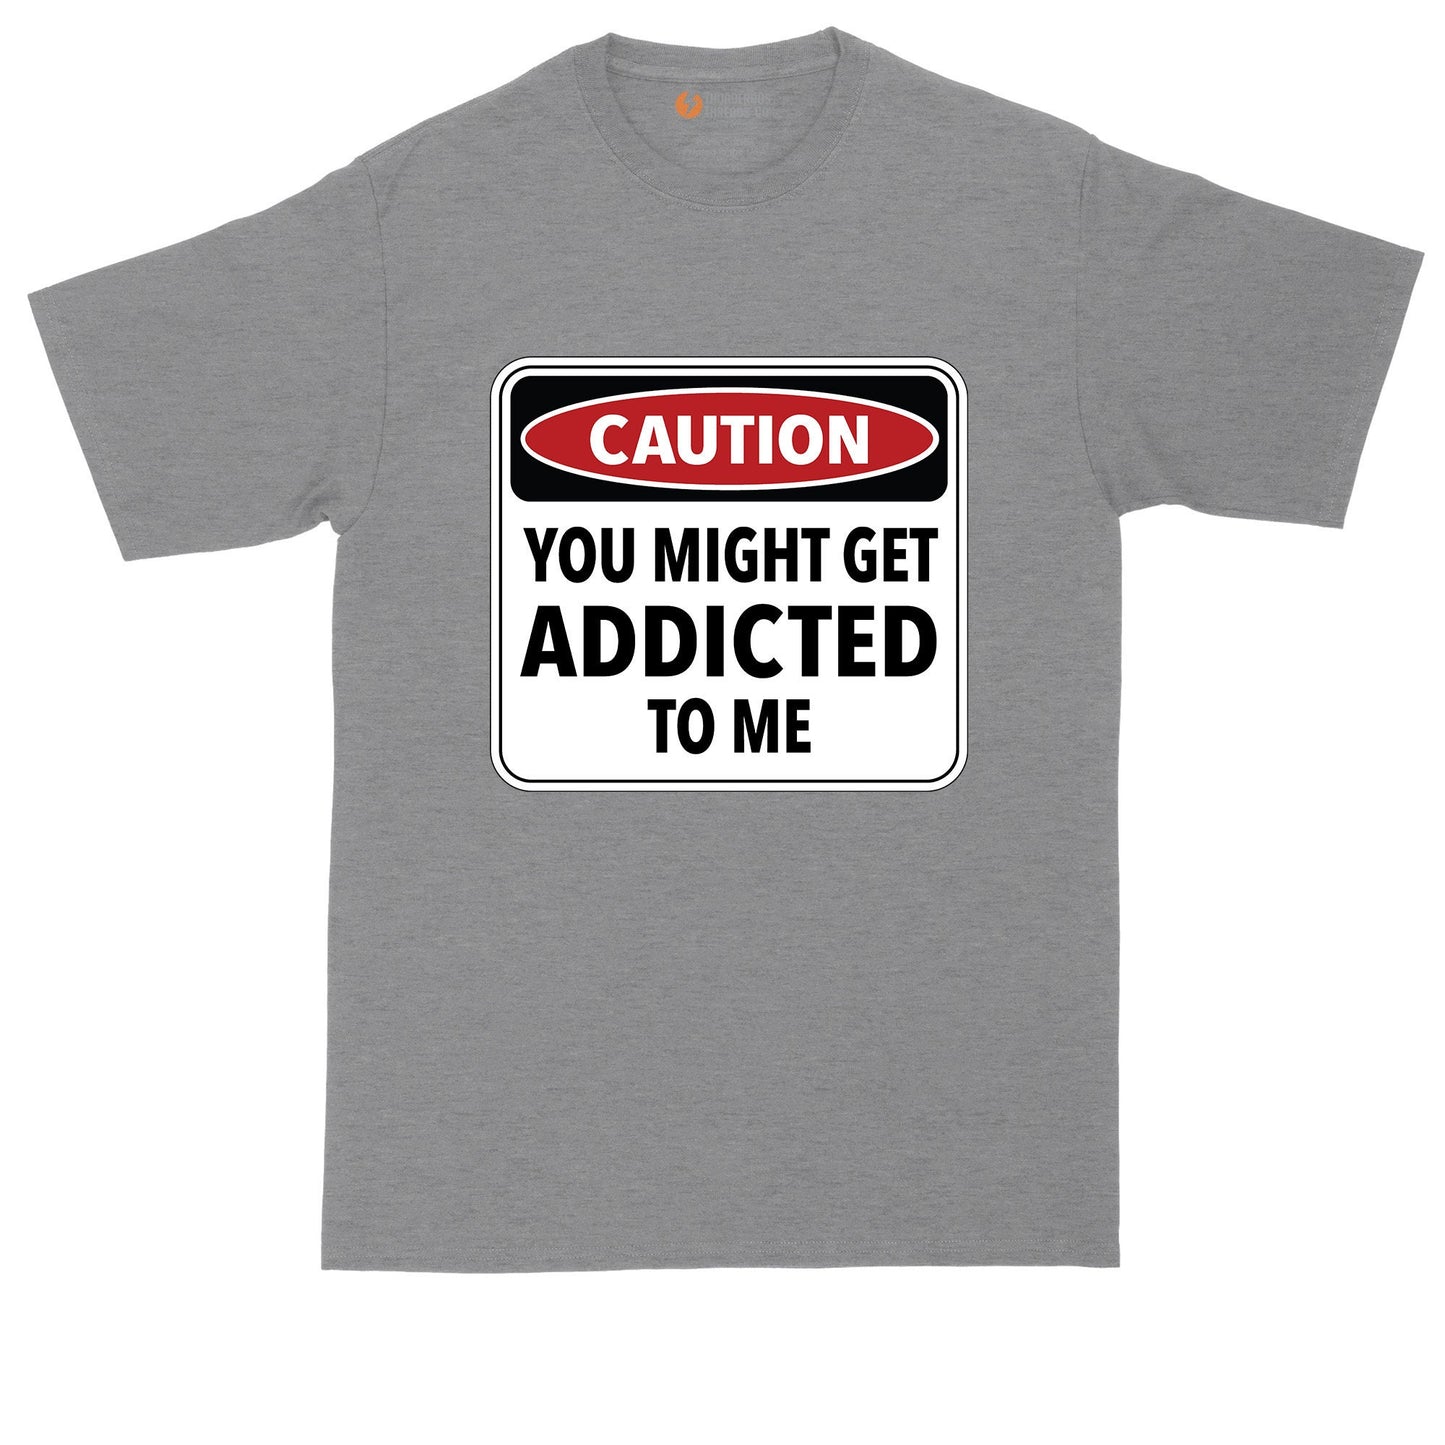 Big and Tall Men | Caution You Might Get Addicted to Me | Mens Big and Tall Graphic T-Shirt | Shirts for Big Guys